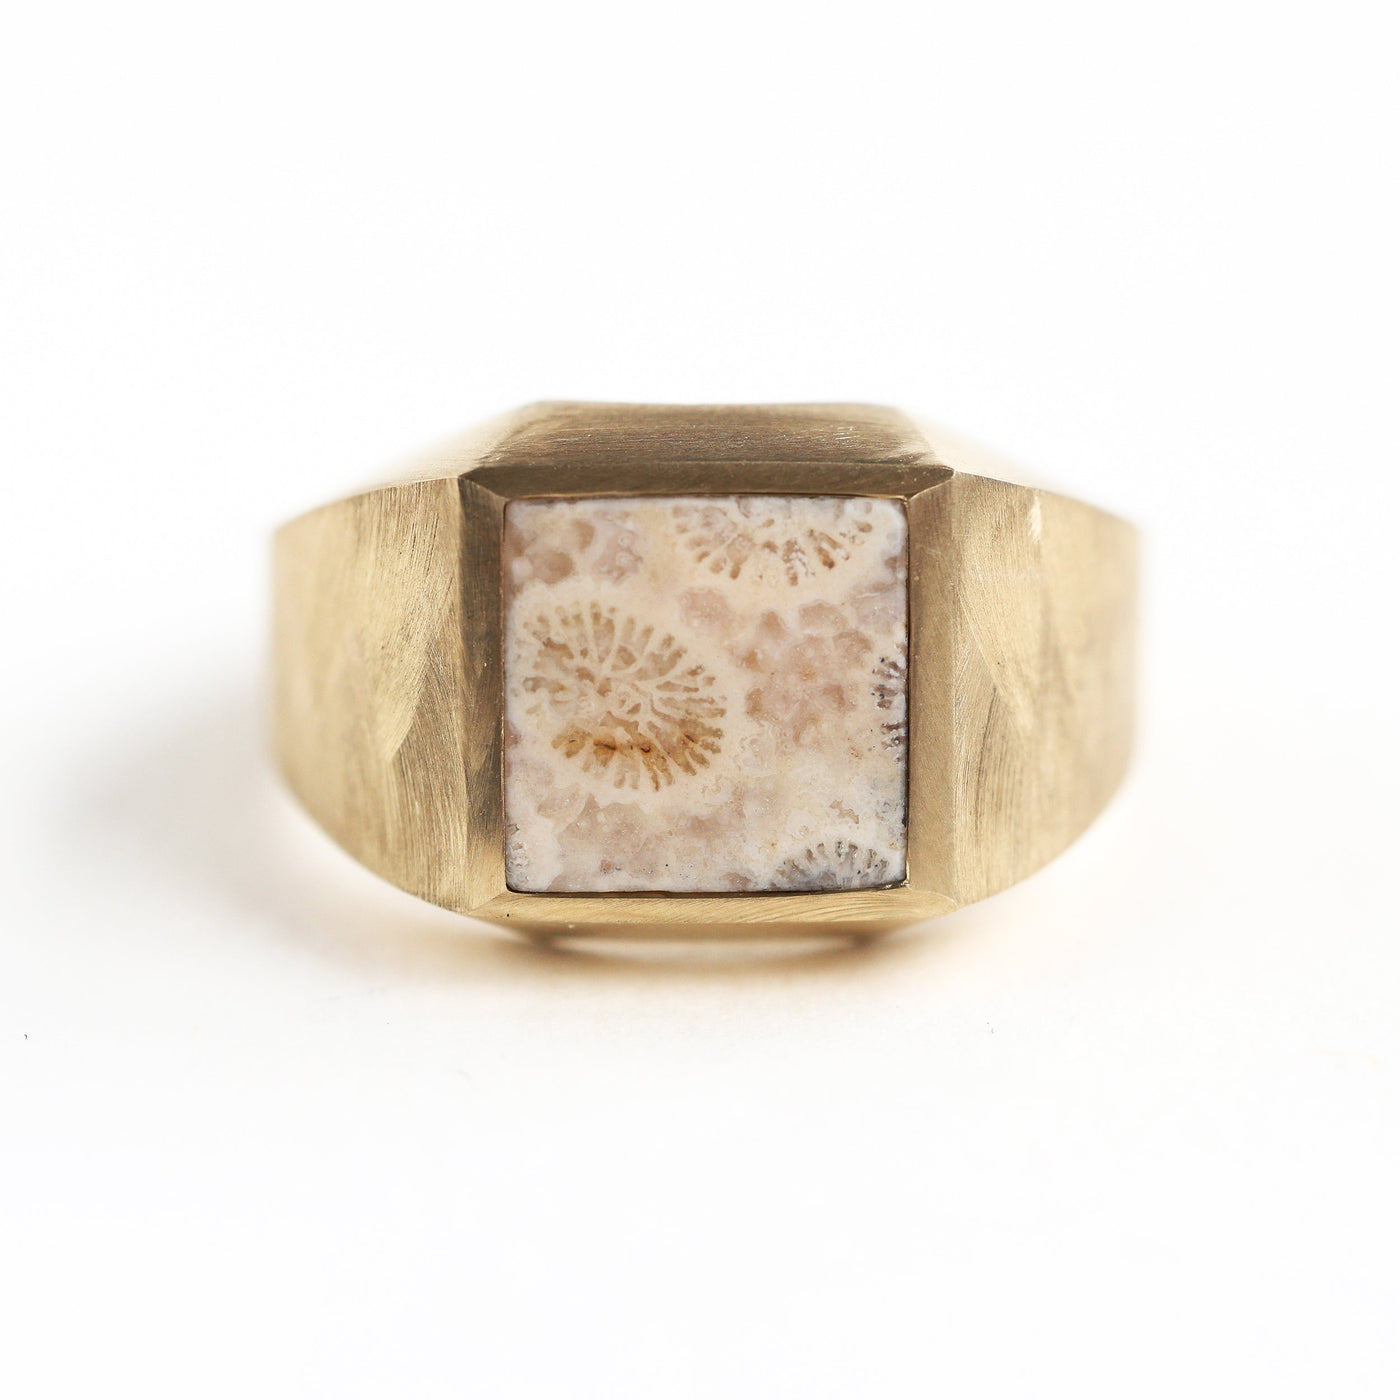 Elegant signet ring with fossilized coral featuring a modern look.